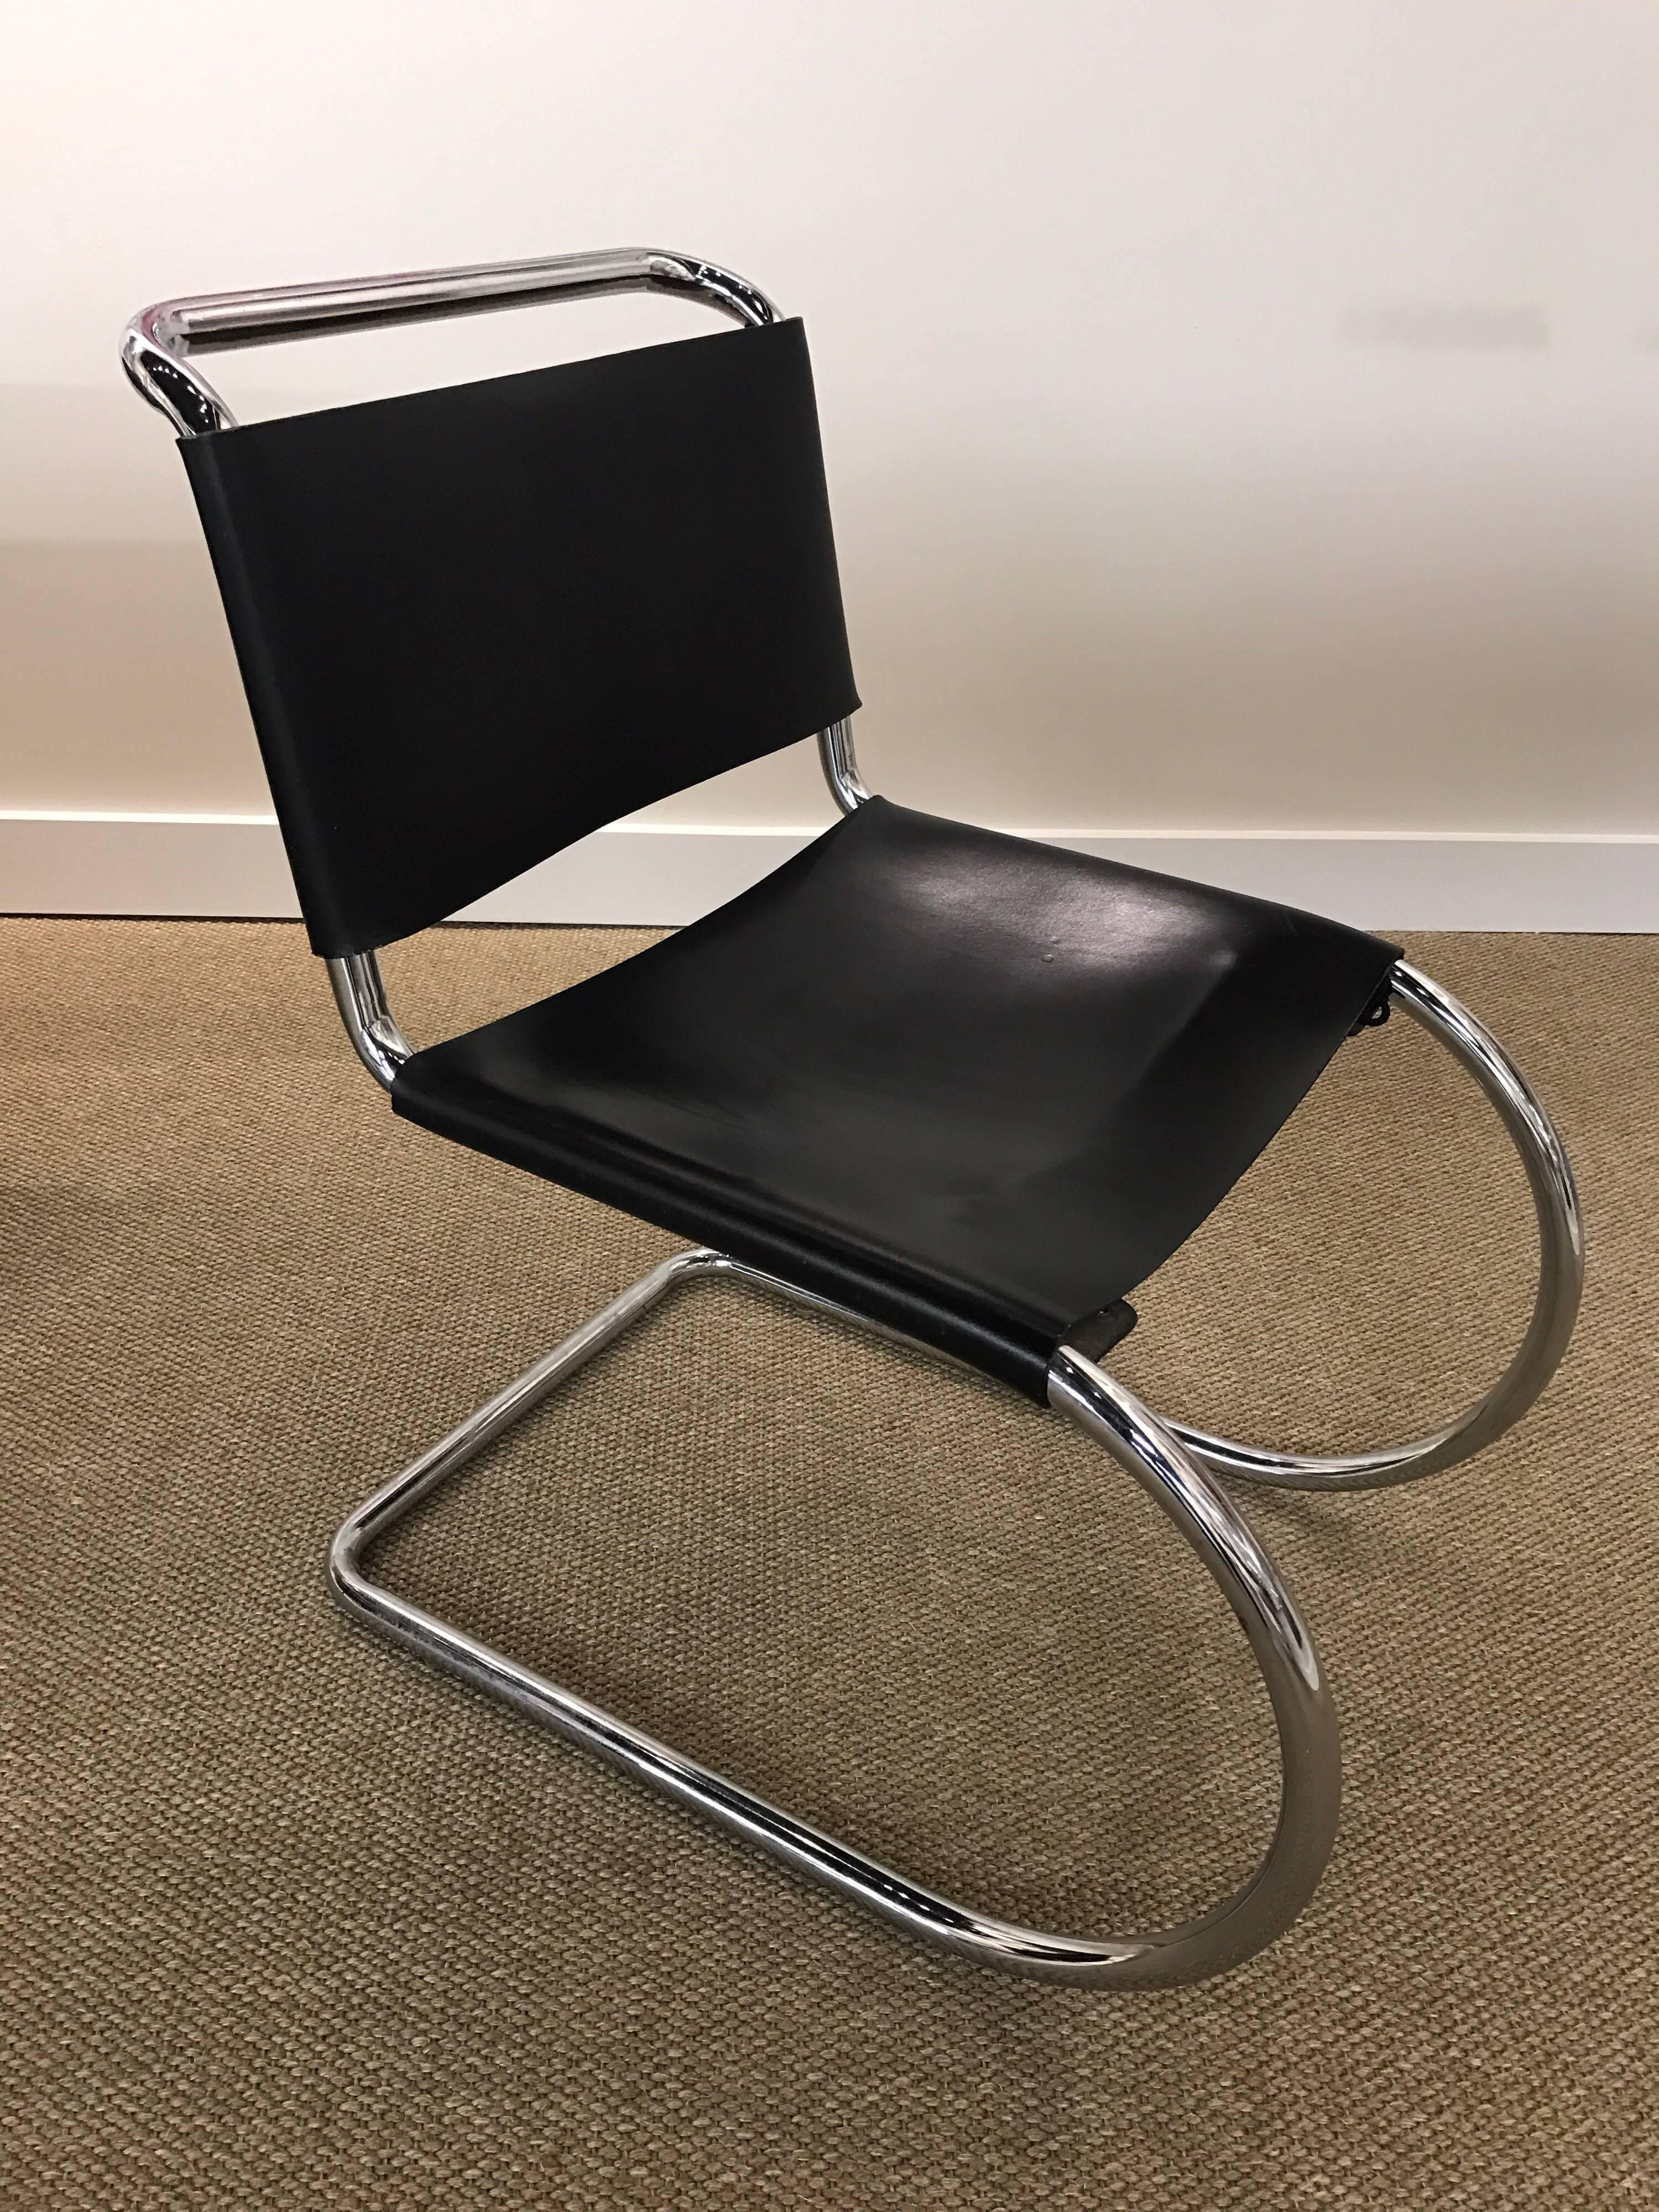 This set of four 1960s Mid-Century Modern style dining room chairs have a unique shaped steel tubular frame with a chrome finish and features a corseted back and seat. The floating frame has a curved front with a square backrest and chair handle.